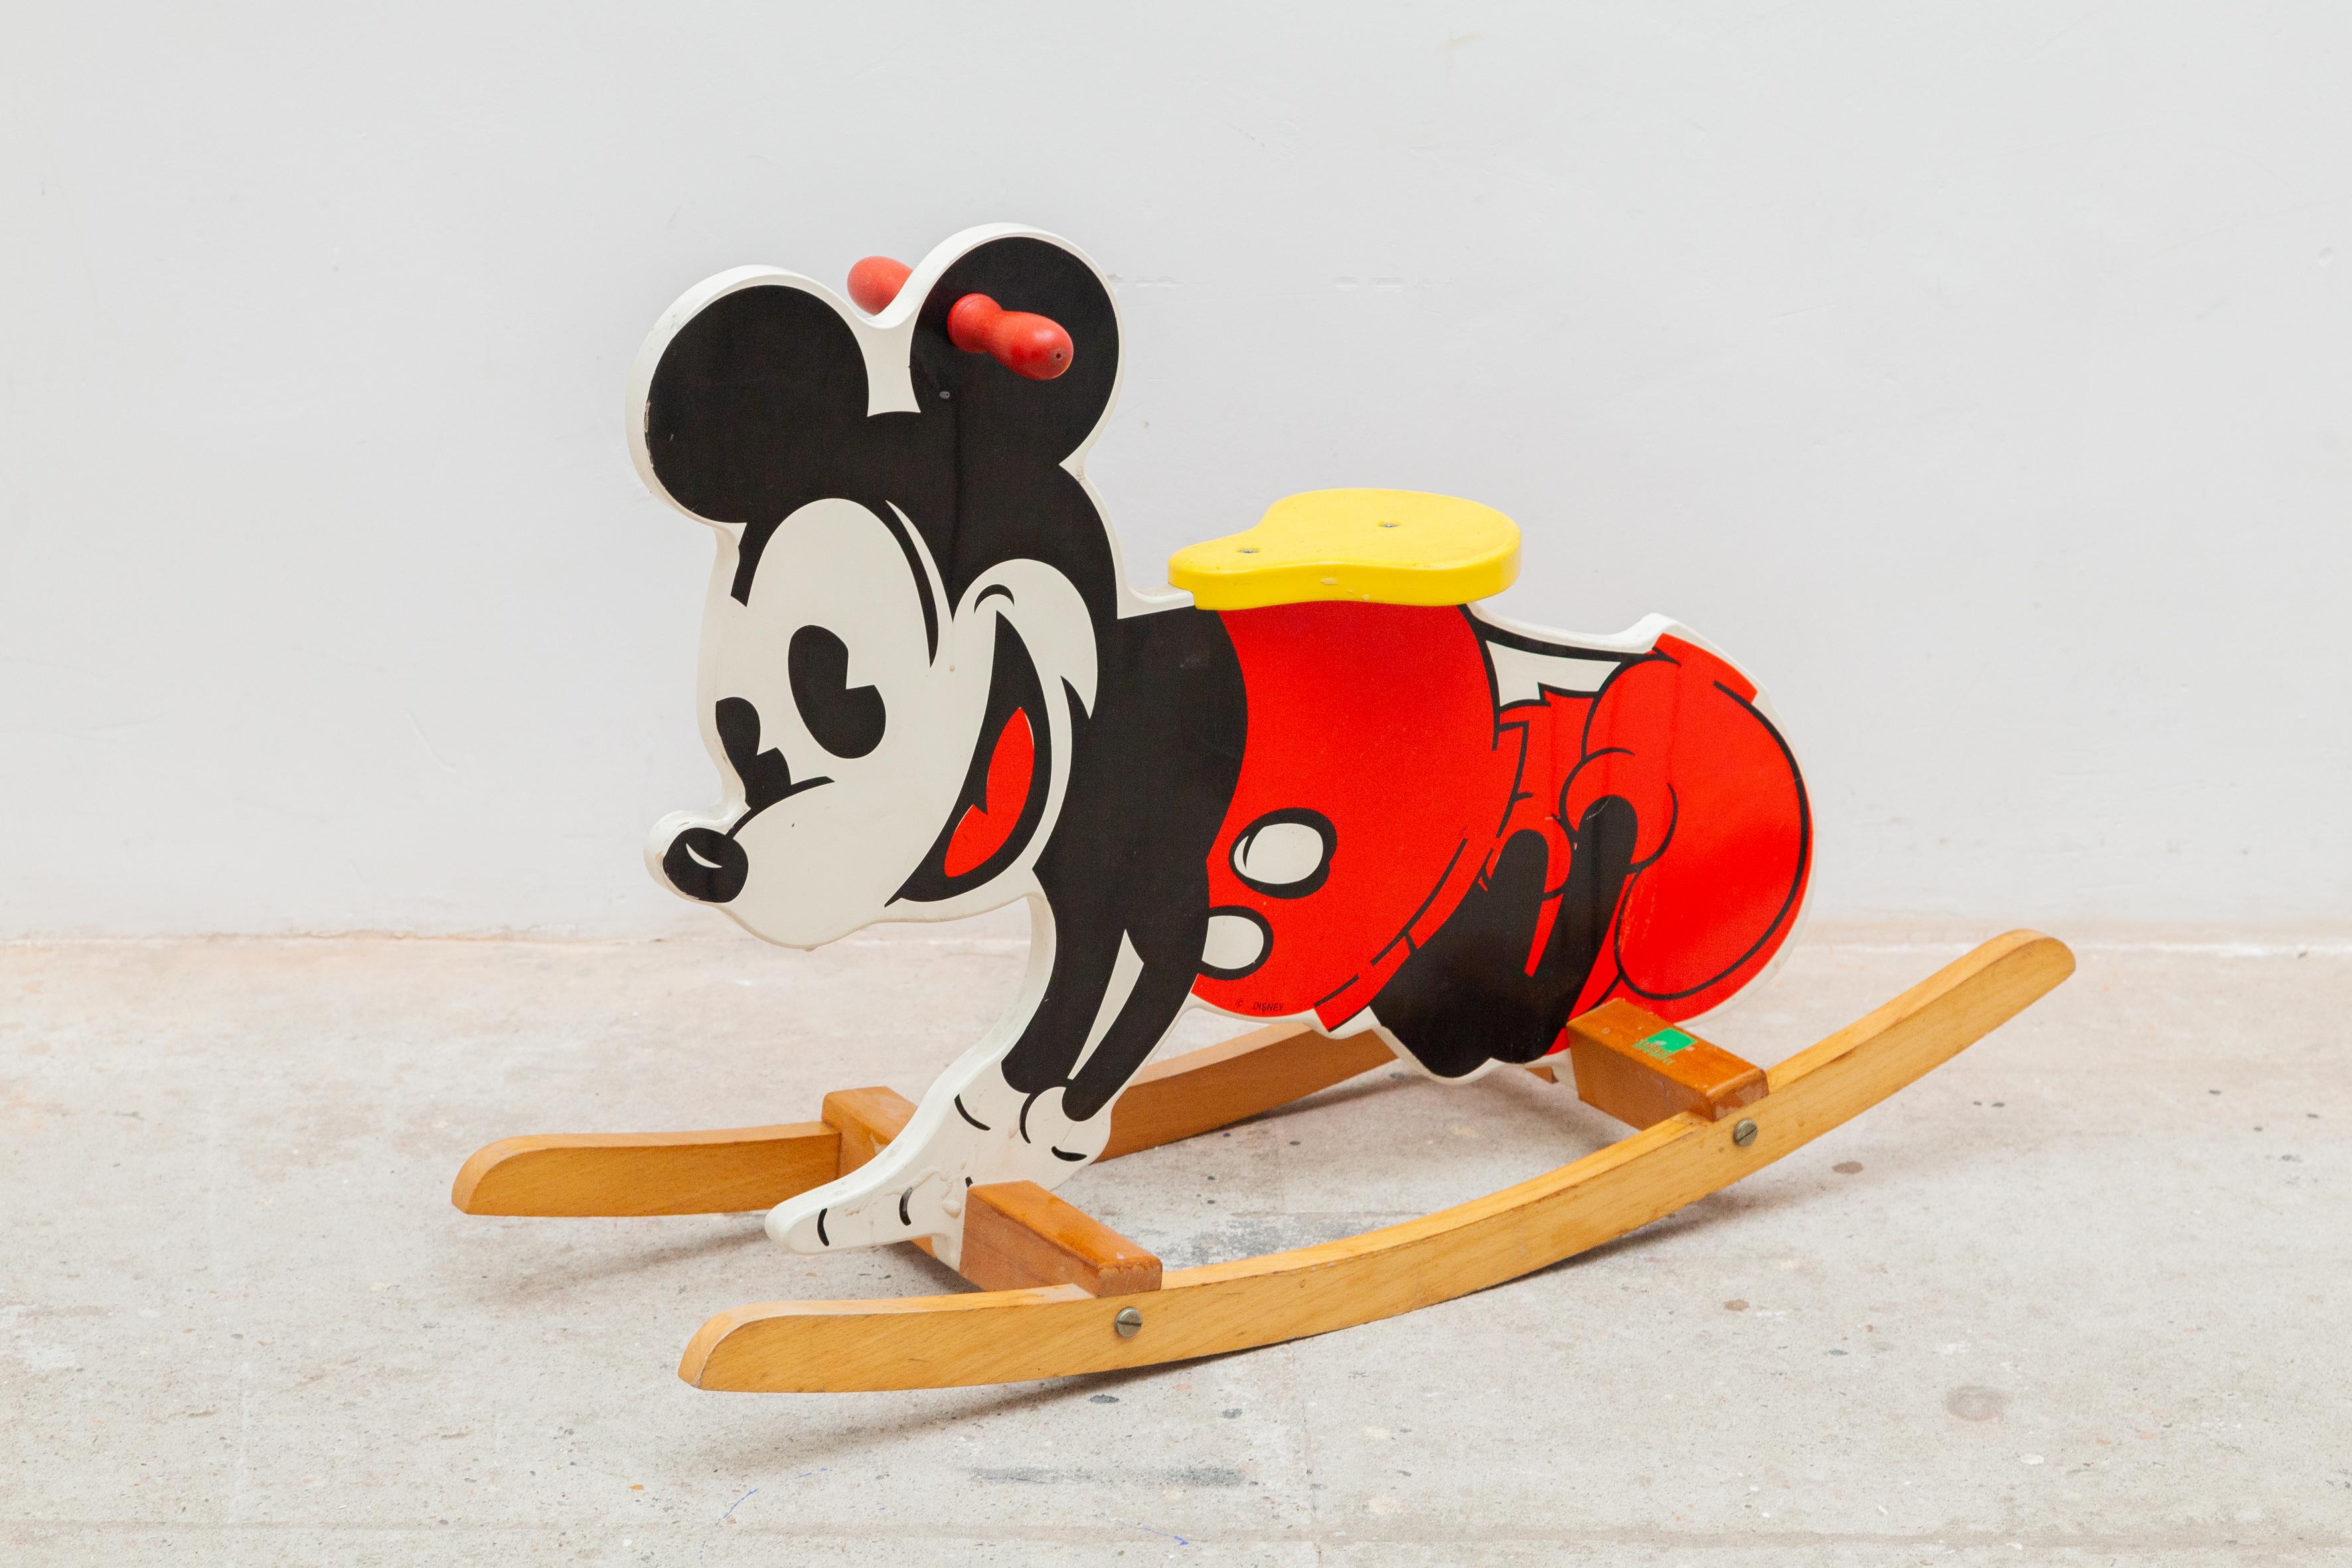 Vintage 1980's Mickey Mouse Rocking Horse made all of wood, This is a Vilac France Disney Mickey Mouse rocker wooden toy.
The original Vilac Made in France label is attached to the bottom of the toy. In original good condition.